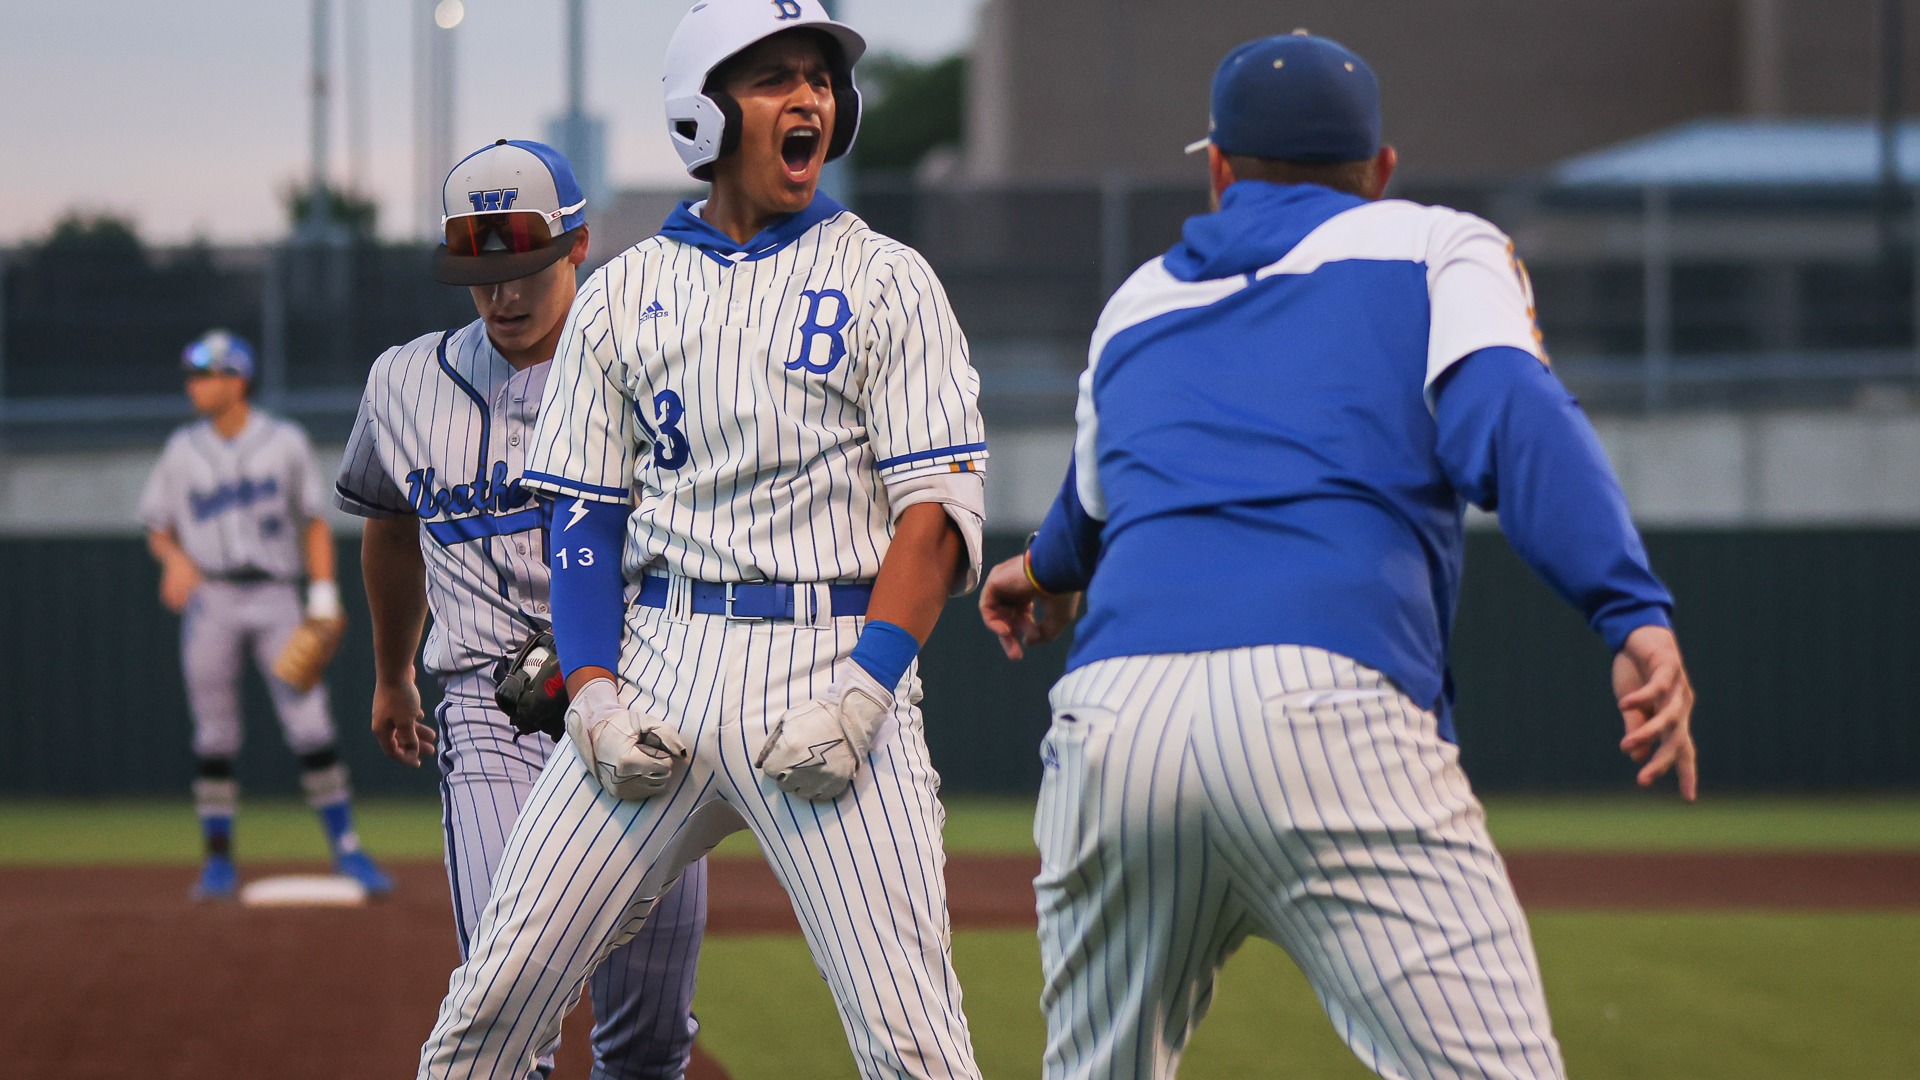 Boswell HSSlide 1 - BOSWELL SECURES THRILLING WALK-OFF WIN DEFEATING WEATHERFORD 6-5